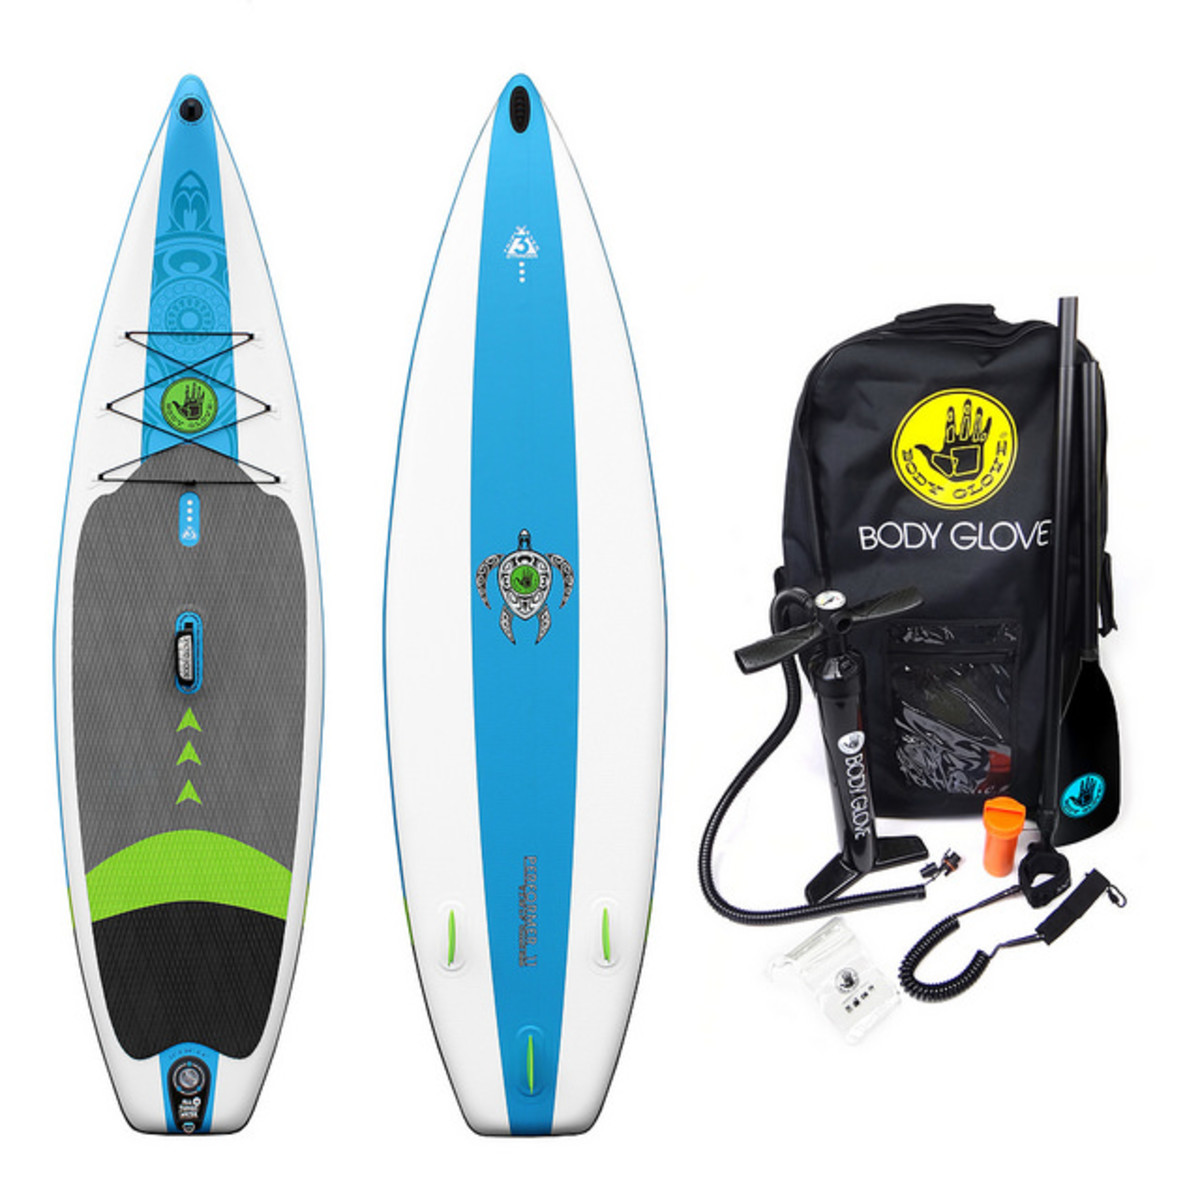 Performer 11 Paddle Board